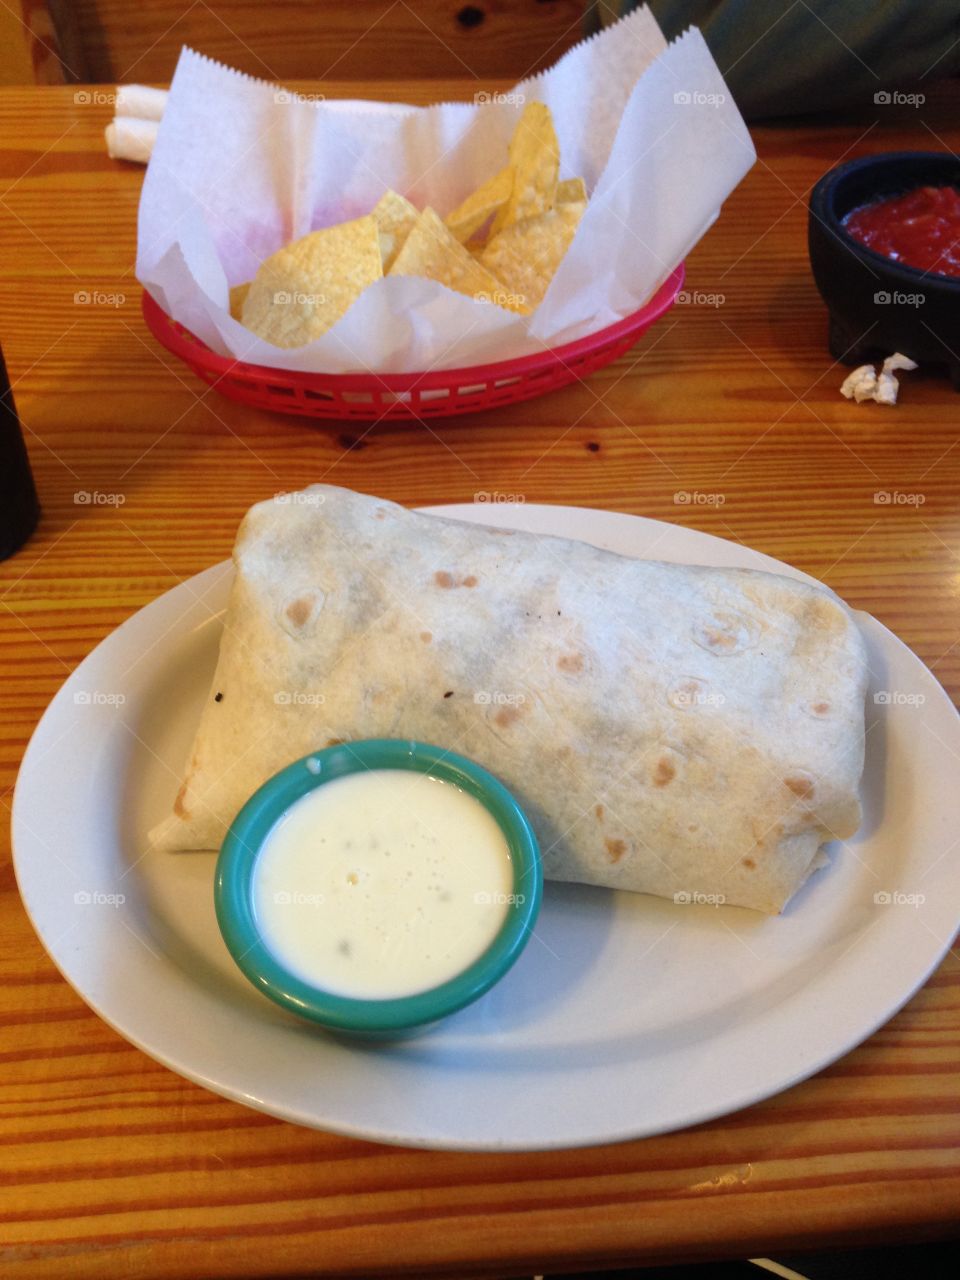 Burrito with Queso on a Plate